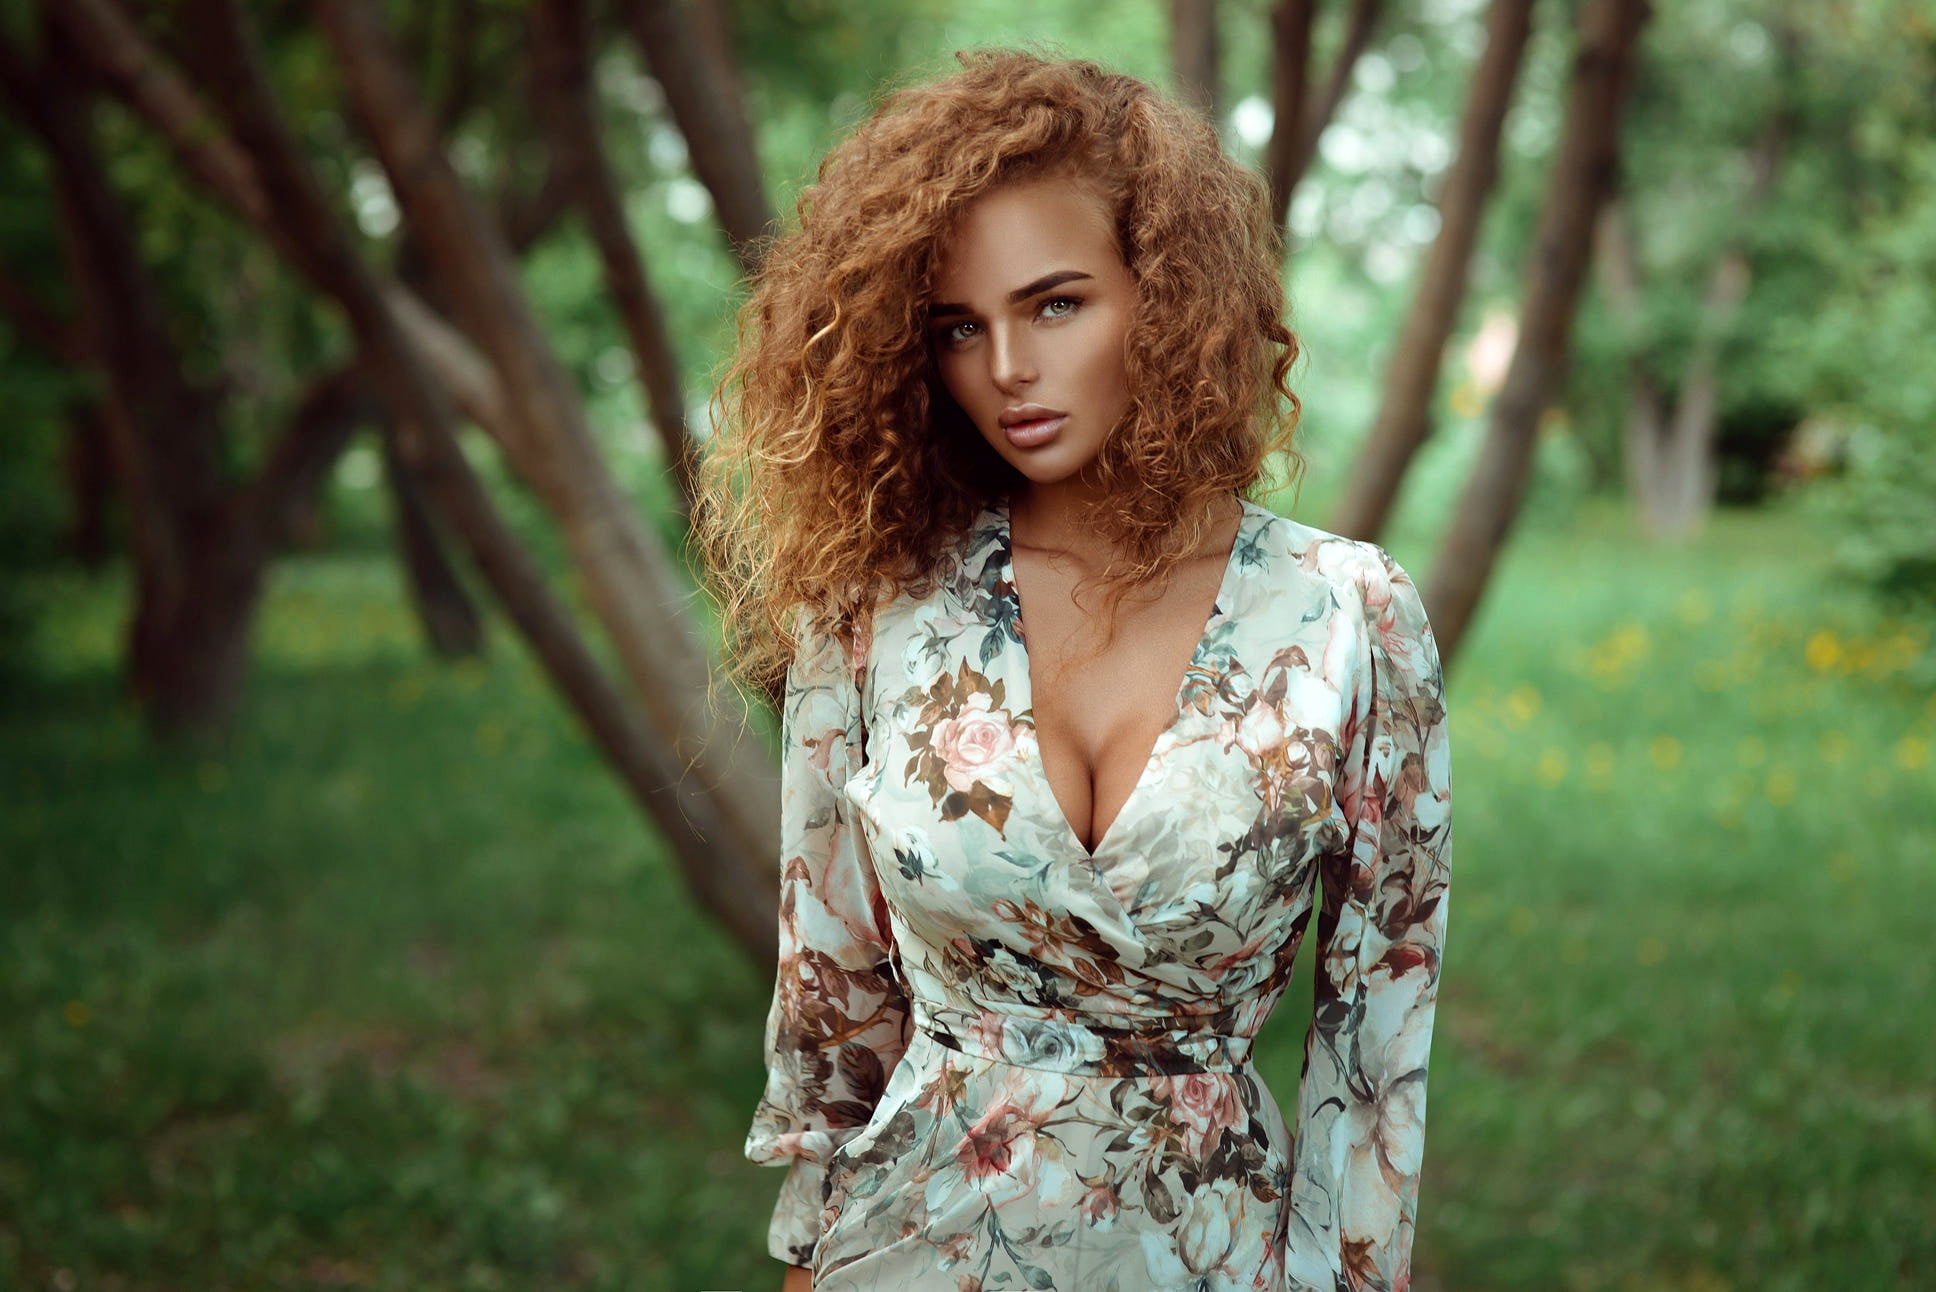 greens, grass, look, trees, nature, Park, background, model